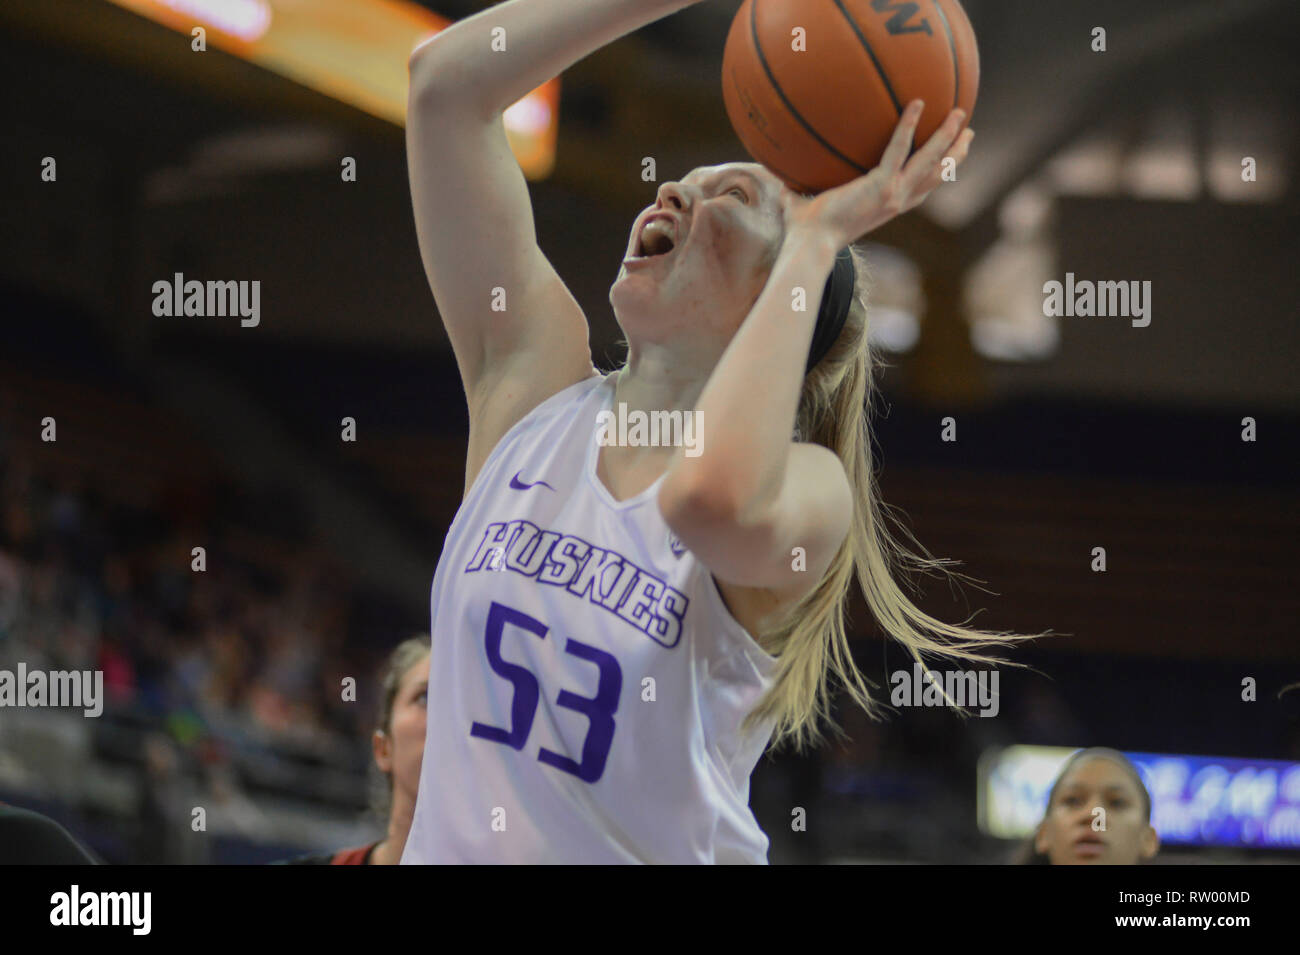 Seattle, WA, USA. 3rd Feb, 2019. UW center DARCY REES (53) goes up for a shot in a PAC12 womens basketball game between the Washington Huskies and Stanford. The game was played at Hec Ed Pavilion in Seattle, WA. Jeff Halstead/CSM/Alamy Live News Stock Photo